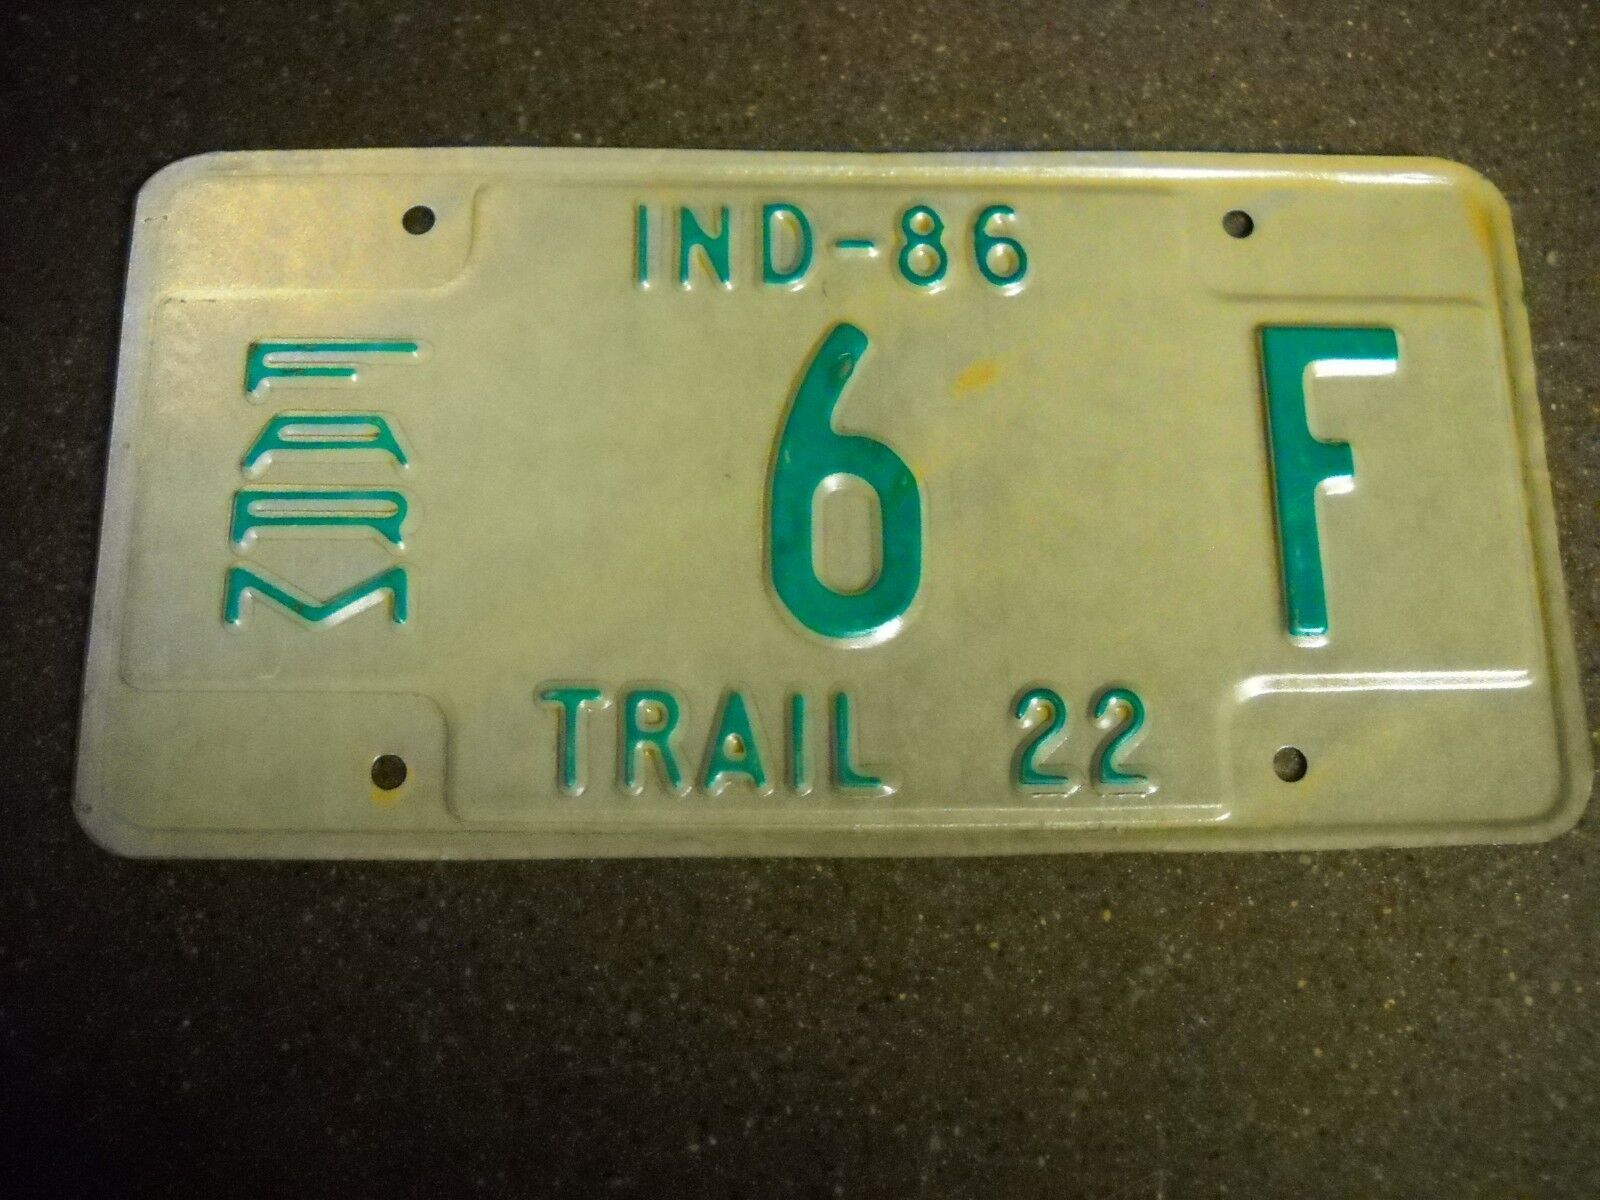 Rare Vintage 1986 Indiana Farm Trail Trailer License Plate  6 F Low Number 